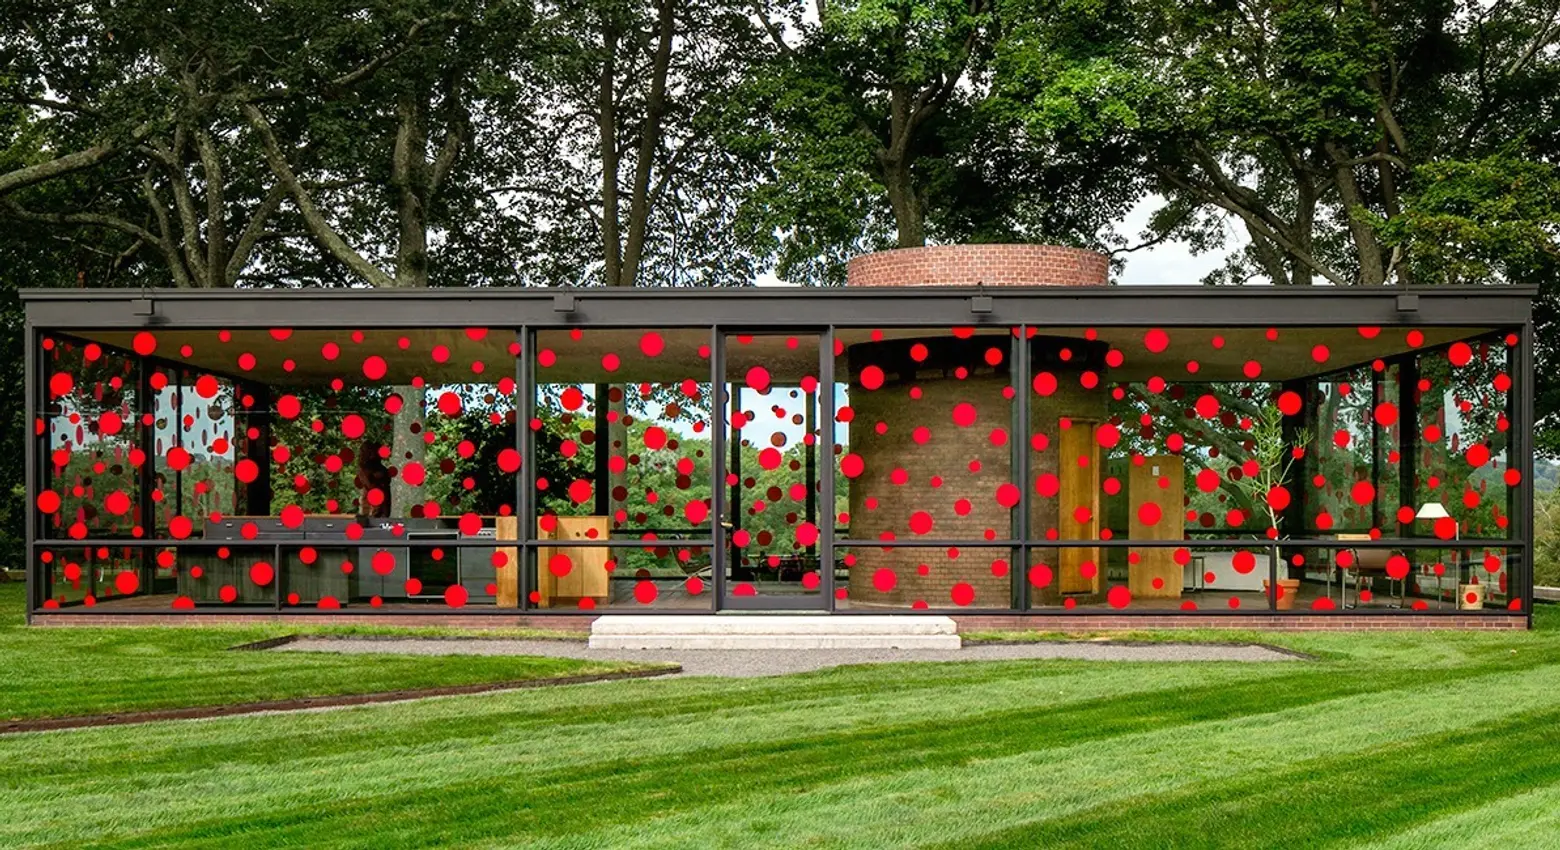 Philip Johnson’s Glass House covered in polka dots; Pantone determines Donald Trump’s color